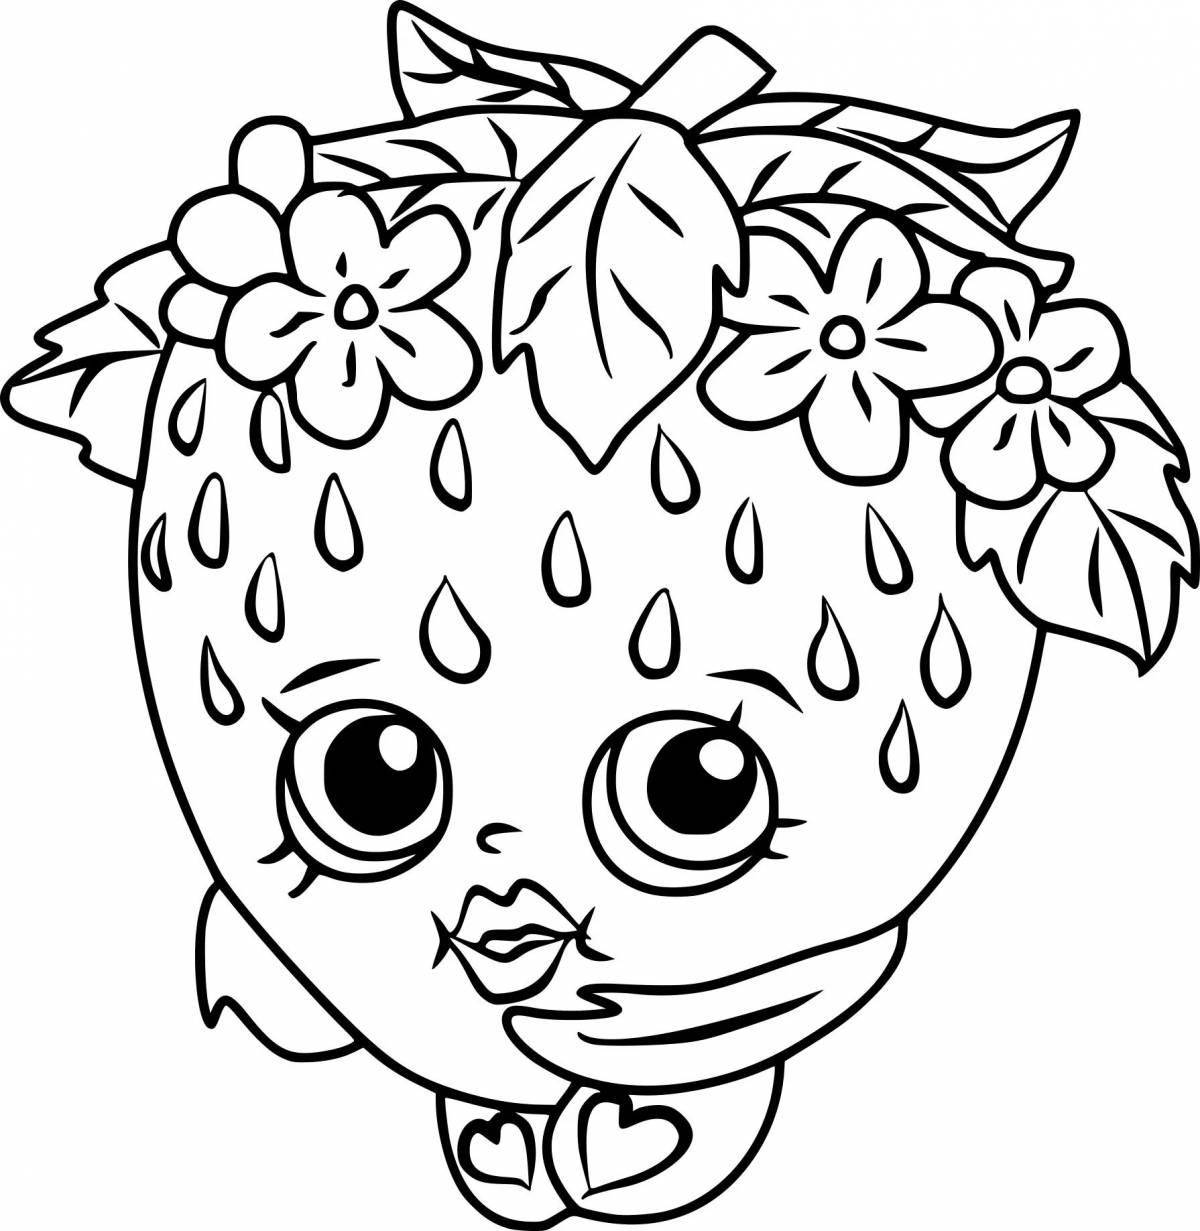 Coloring book for girls strawberry